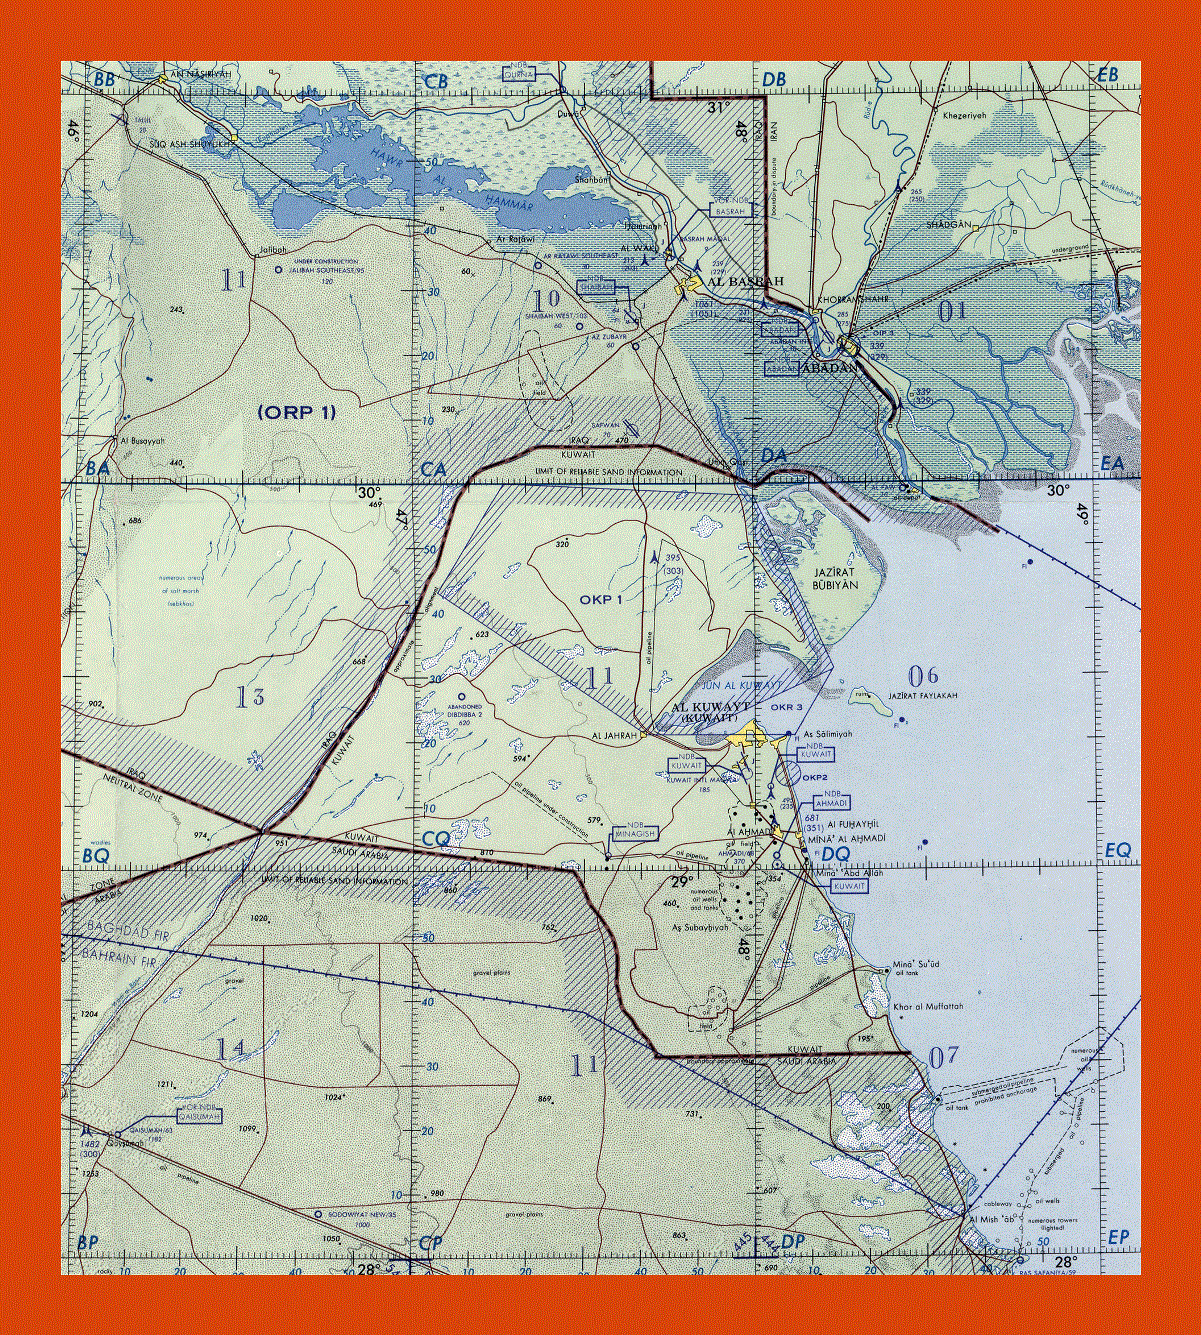 Topographical map of Kuwait